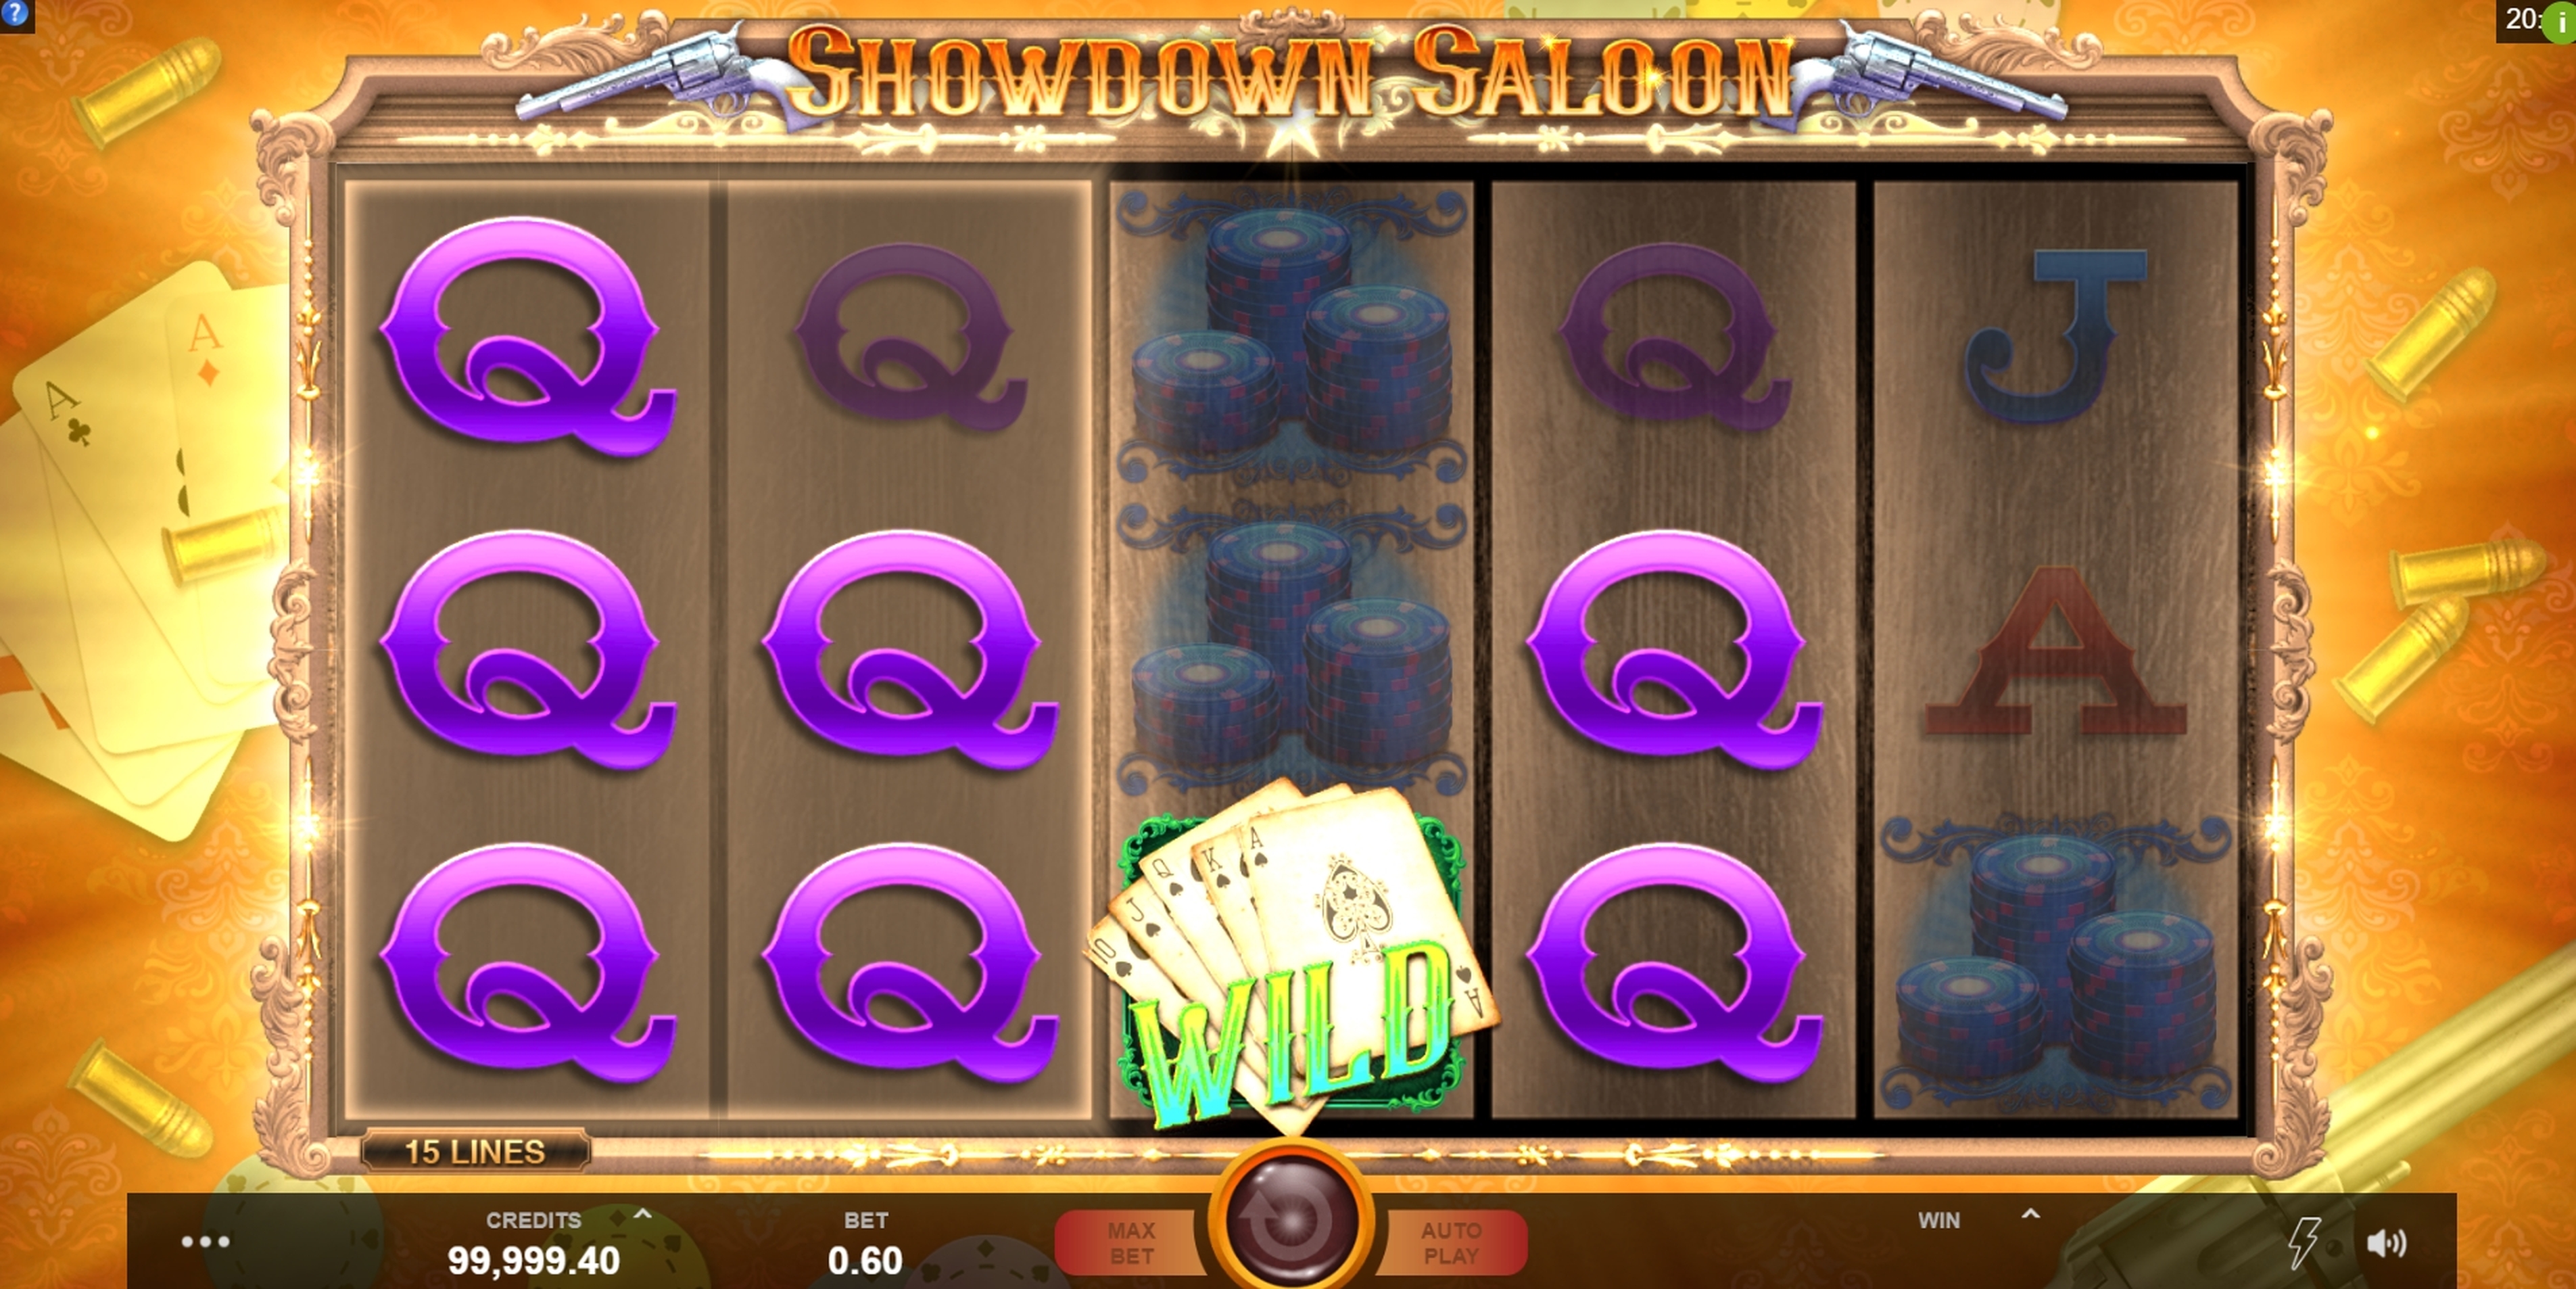 Win Money in Showdown Saloon Free Slot Game by Fortune Factory Studios